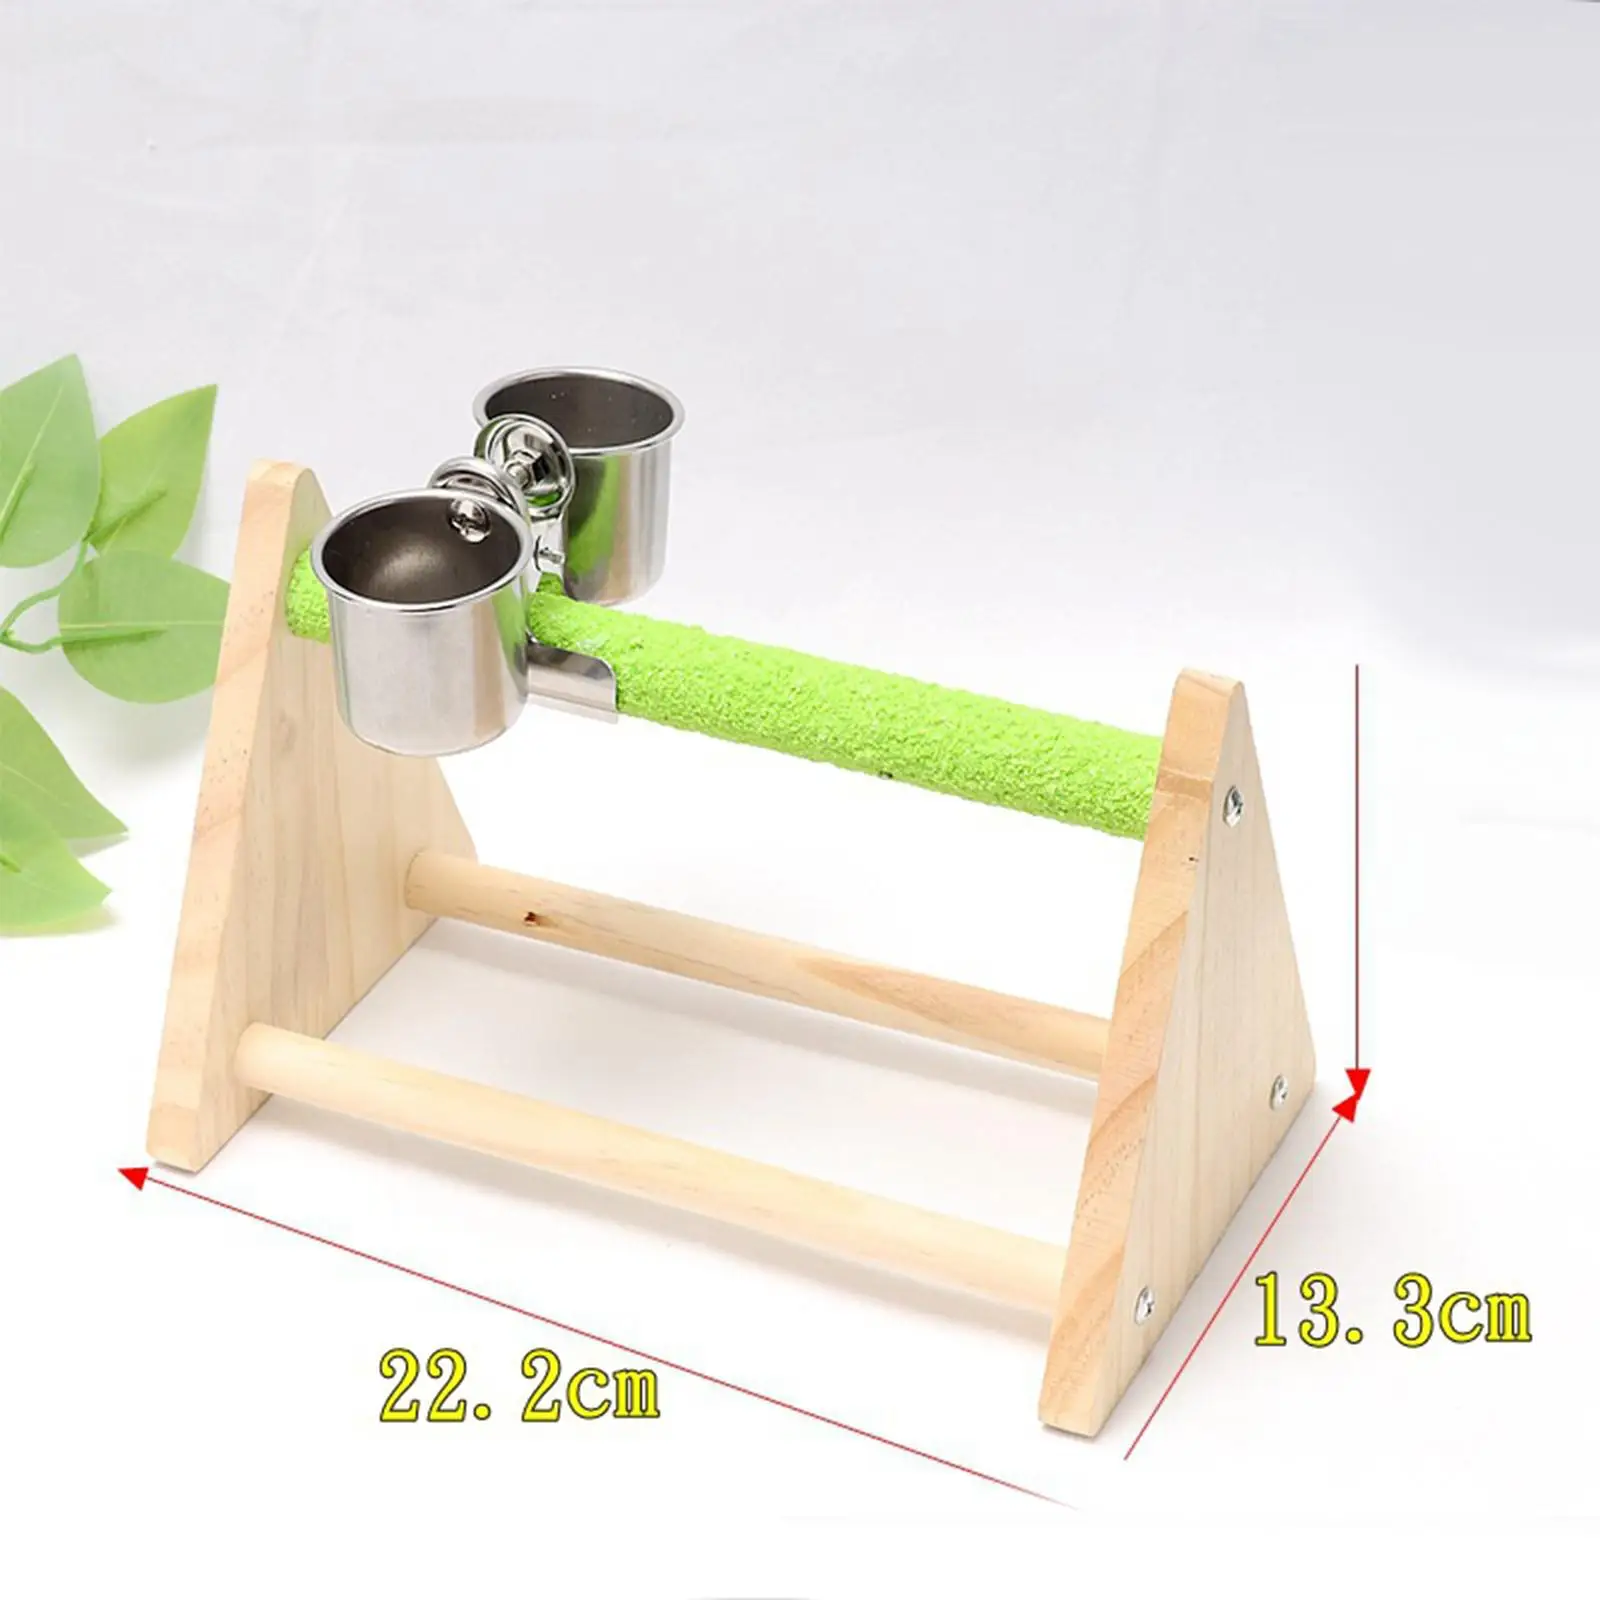 Bird Feeder stands with Feeder Cup Wood Perch Bird Training Parrot Playstand for Cockatoo